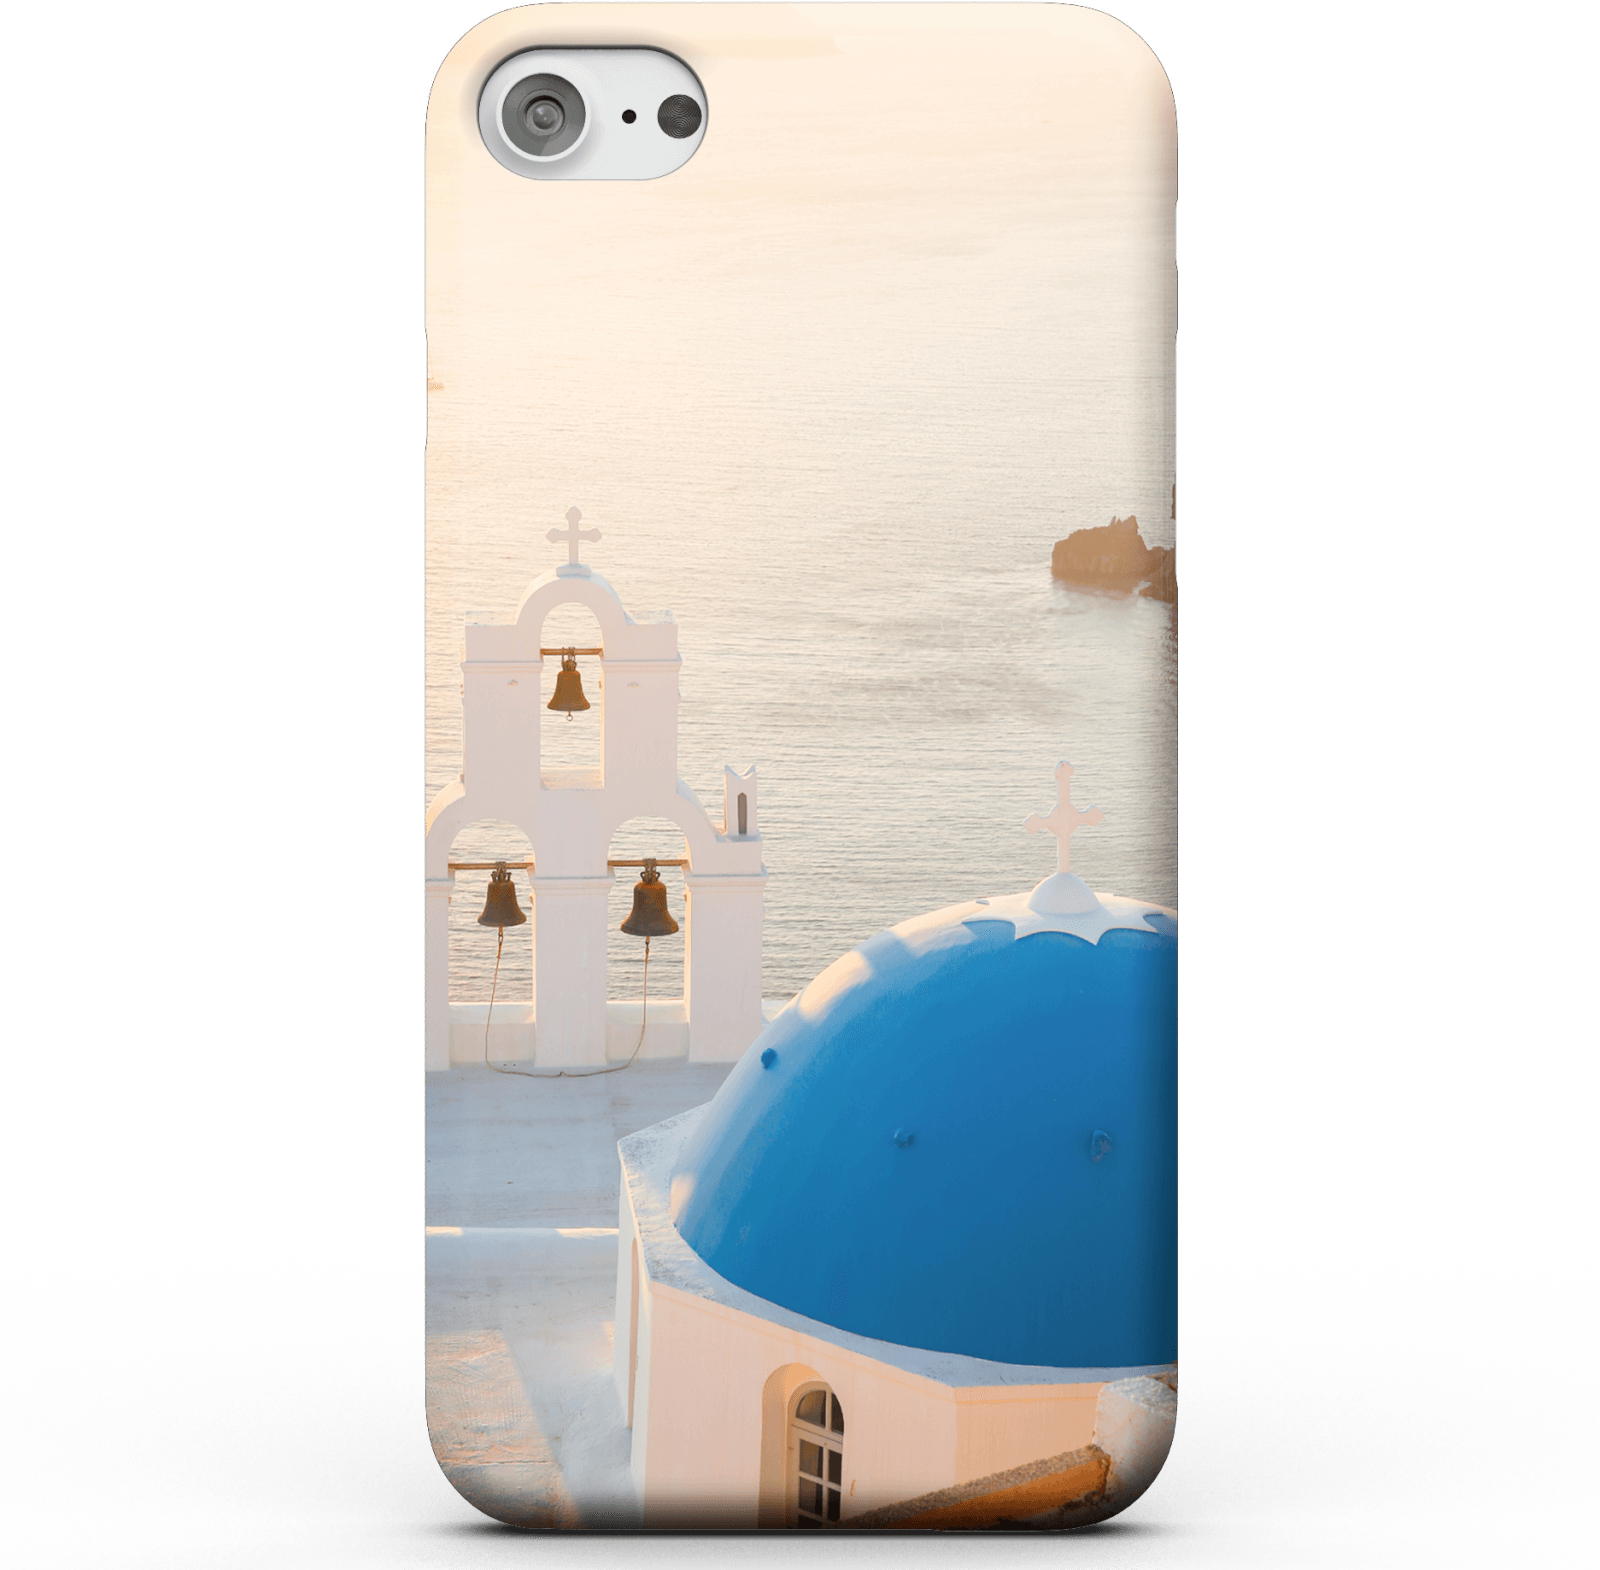 Santorini Sunset Phone Case for iPhone and Android - iPhone 5/5s - Snap Case - Matte